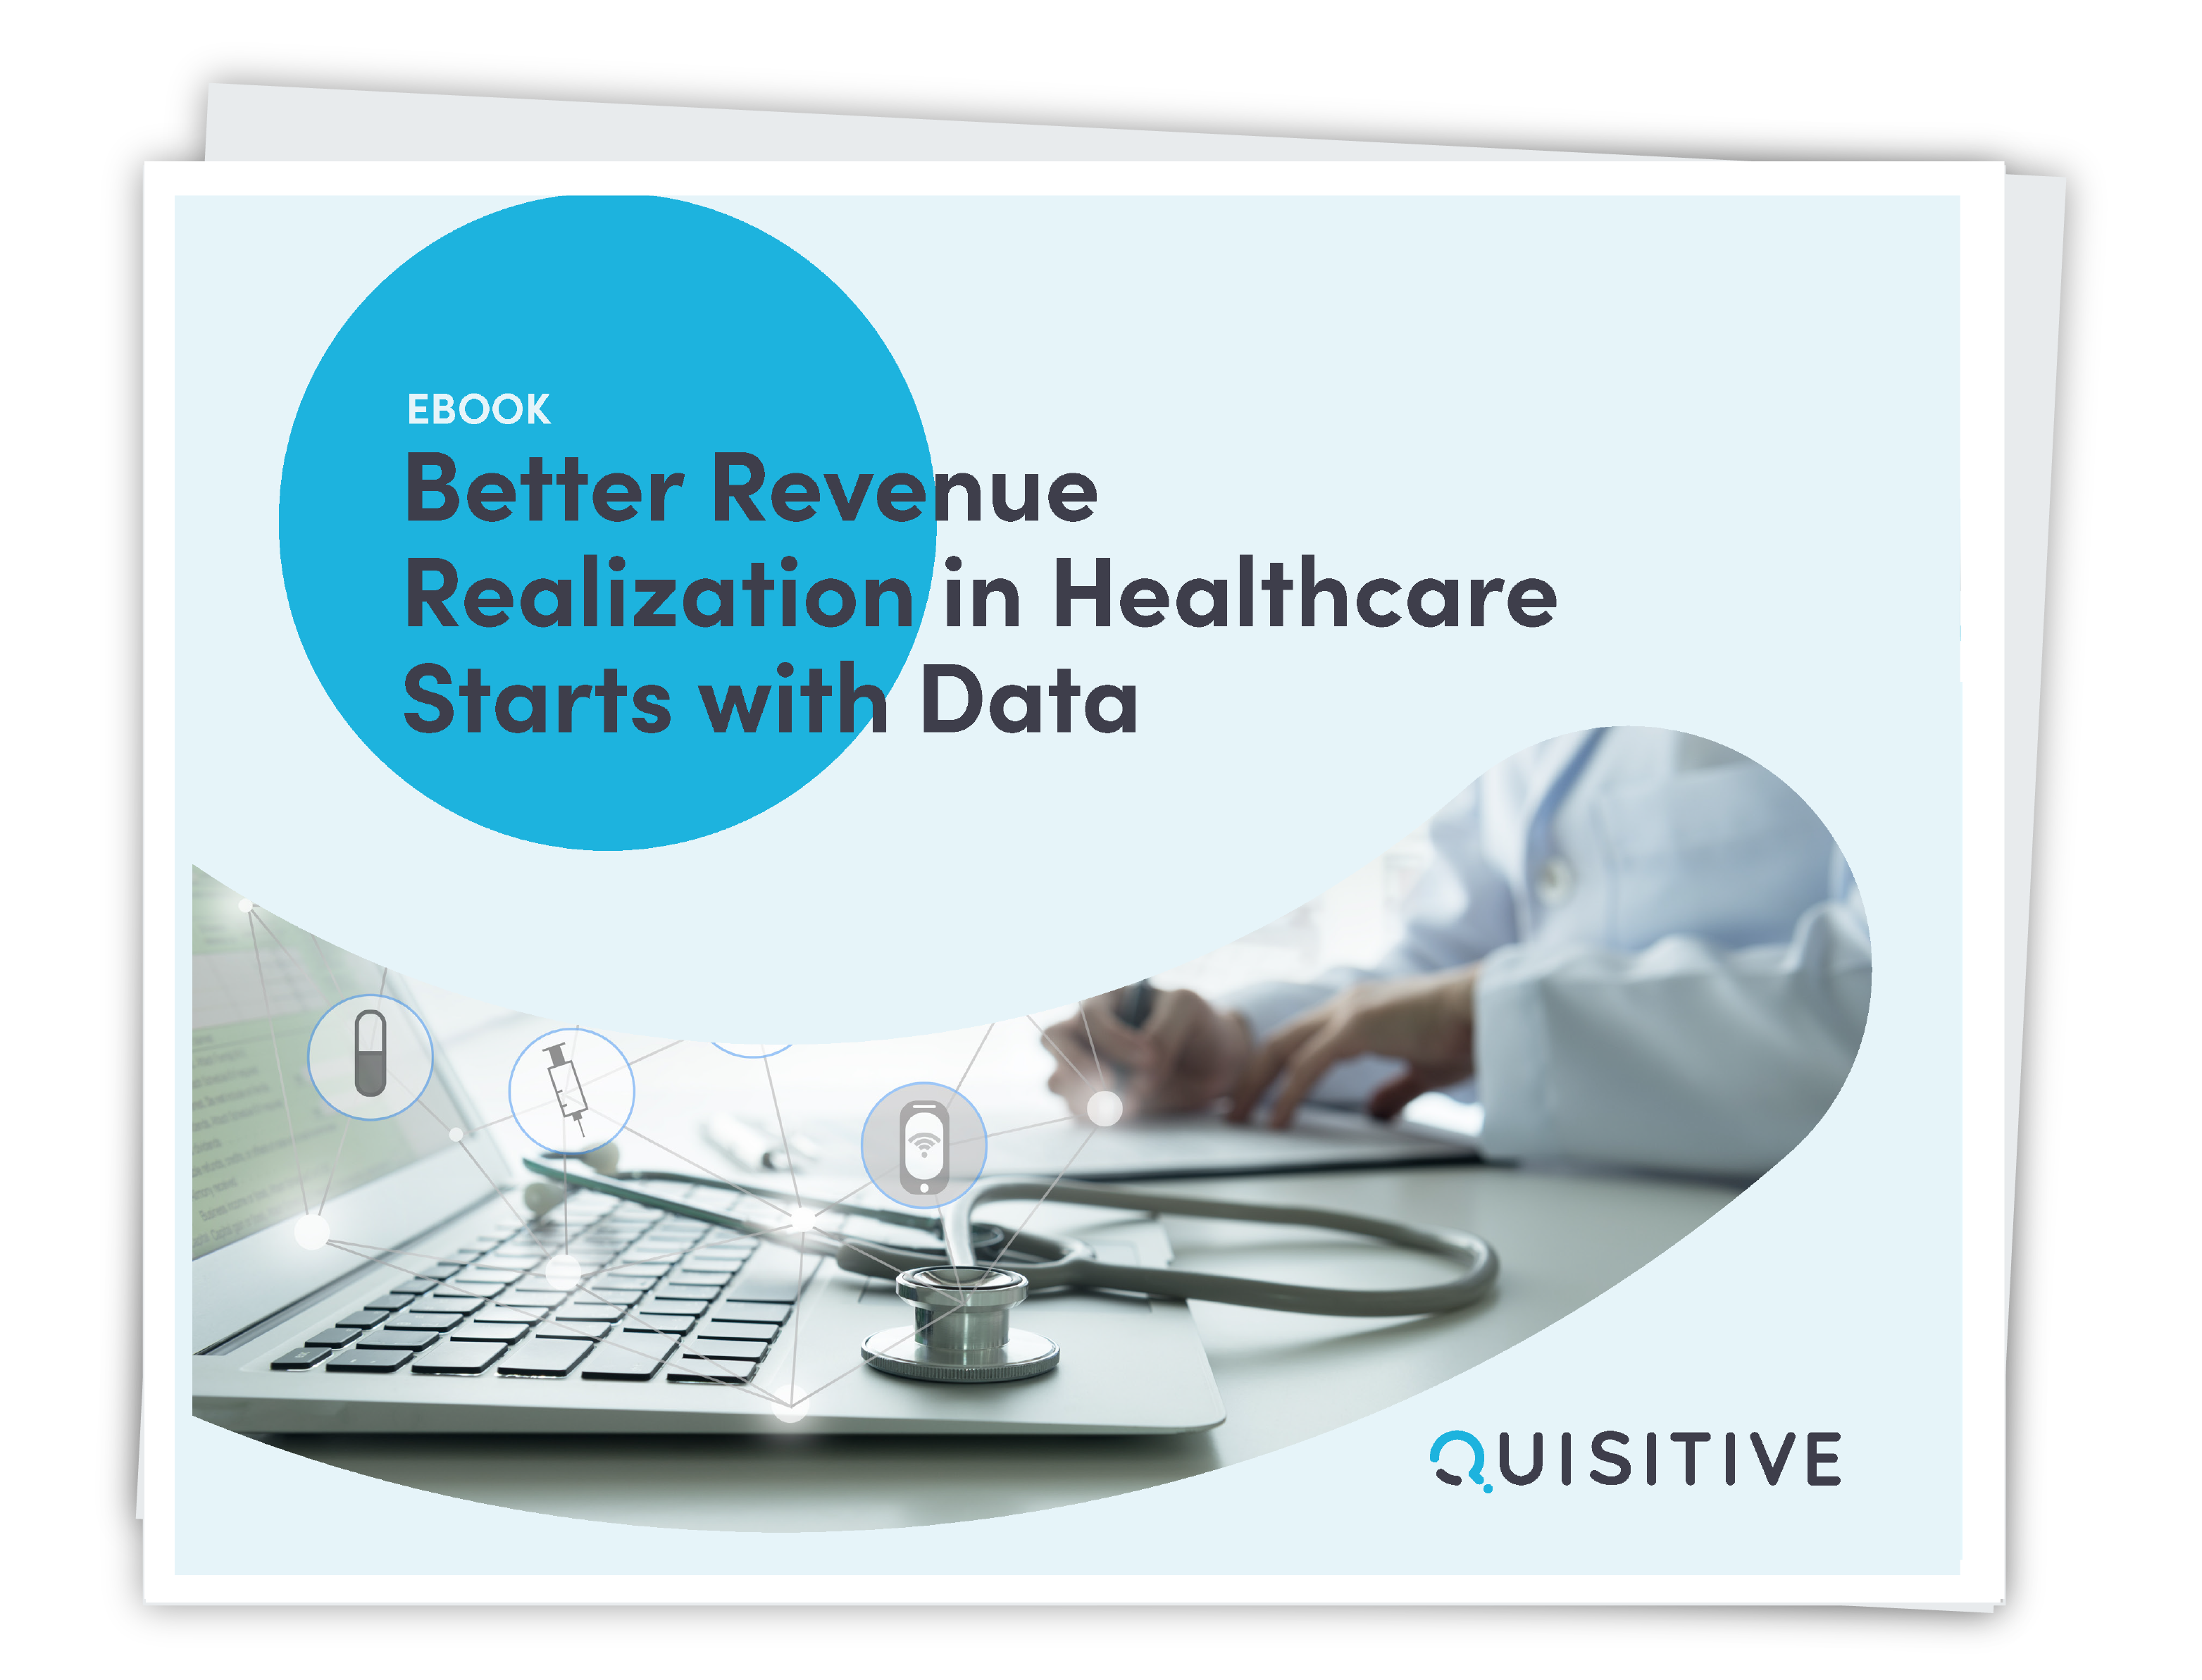 ebook preview image: revenue cycle management in healthcare with MazikCare